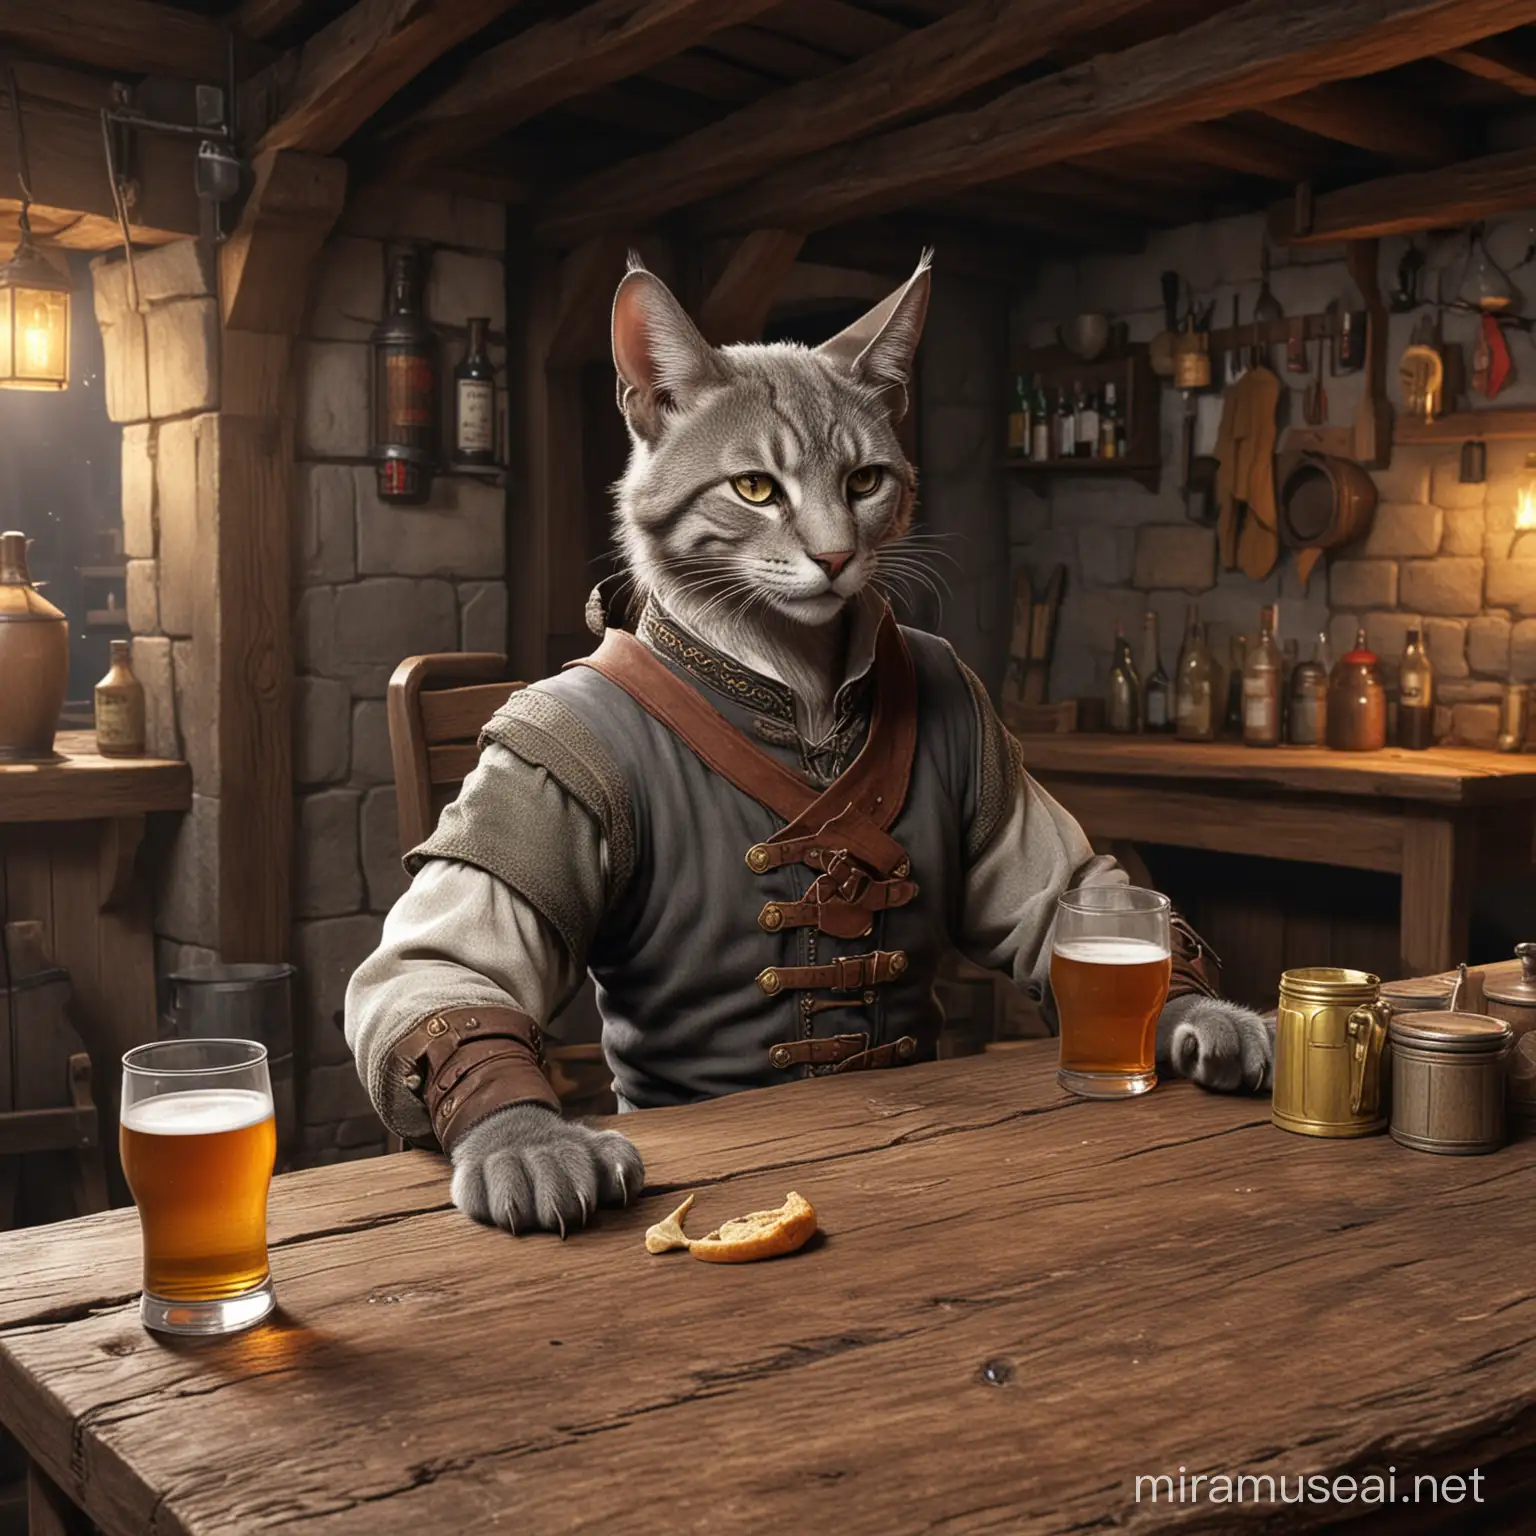 Grey Tabaxi Enjoying a Drink in a Cosy Tavern Atmosphere